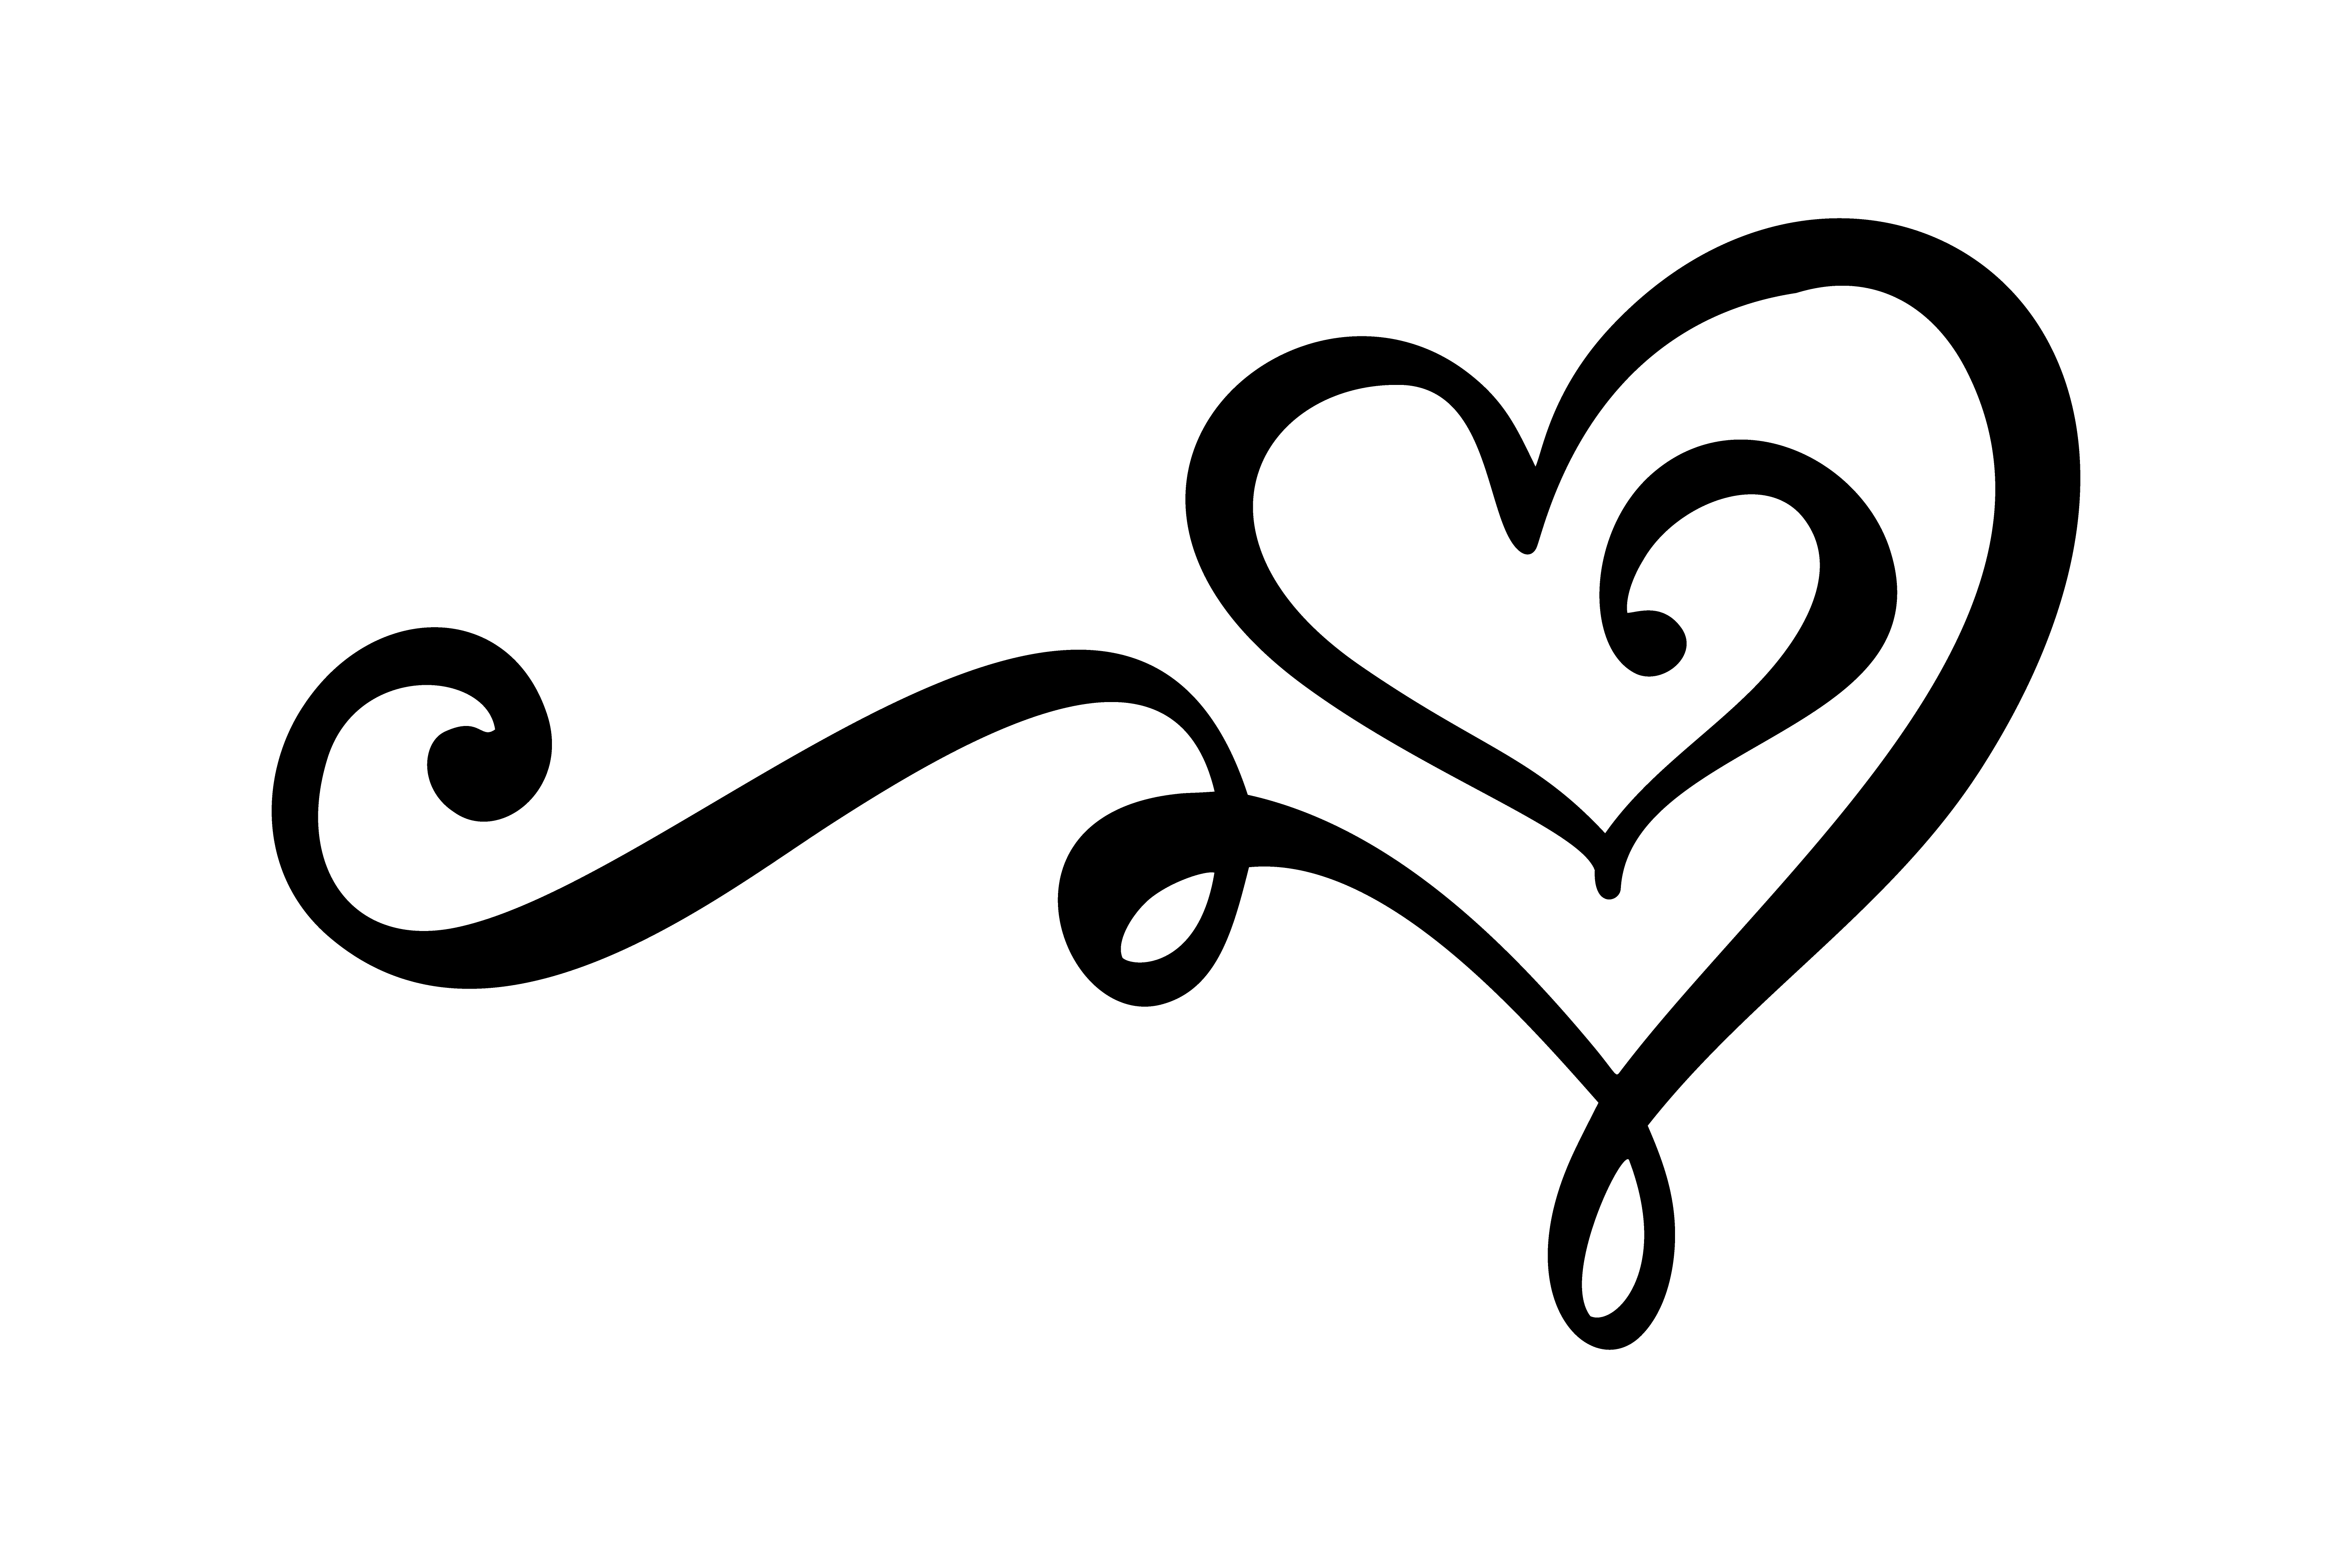 Hand drawn Heart love sign. Romantic calligraphy vector ...